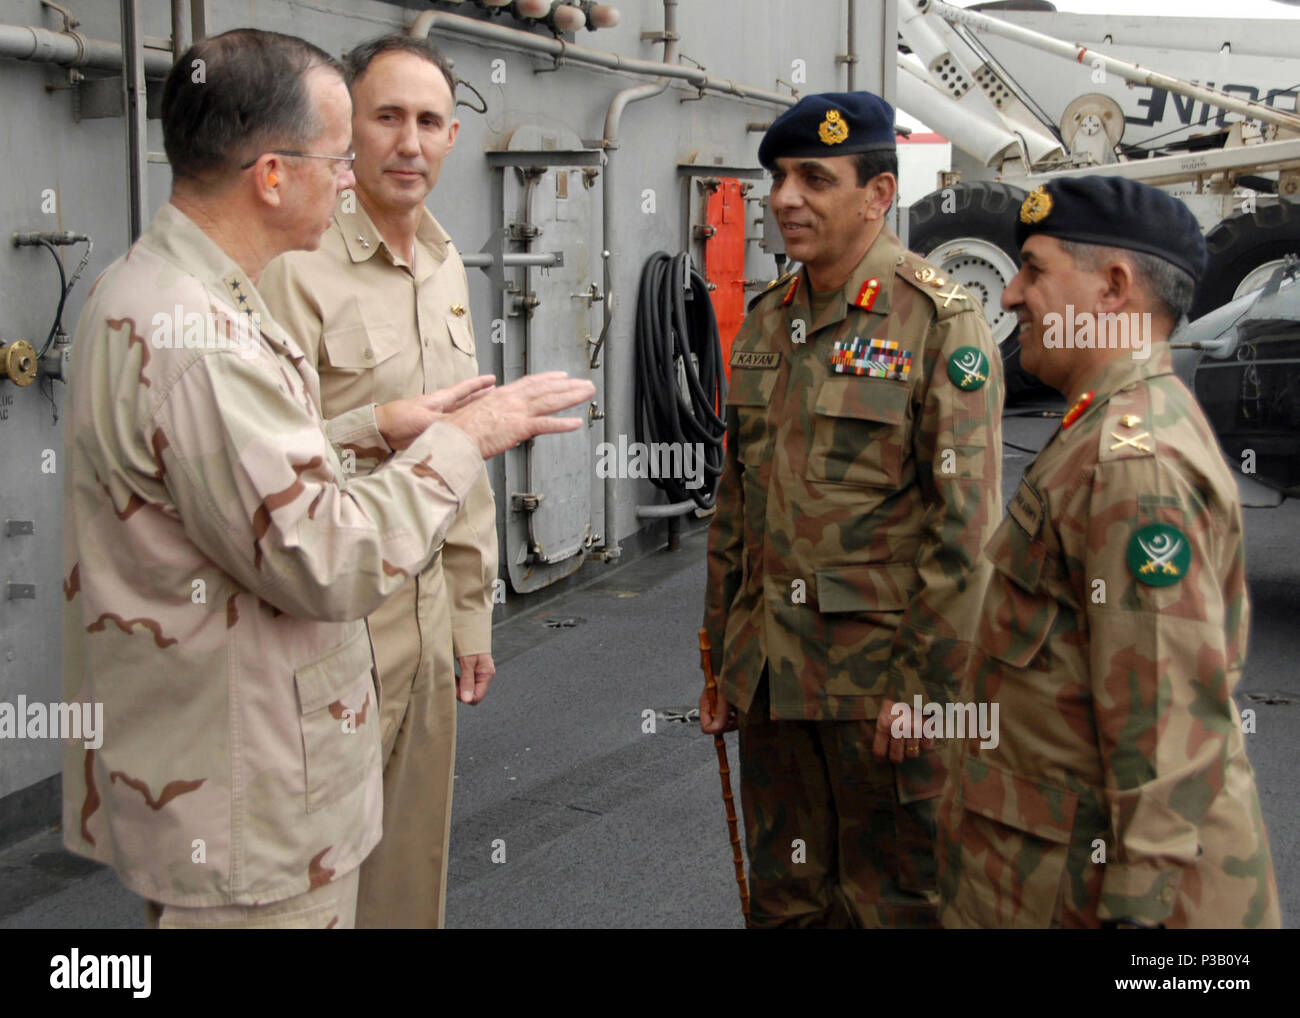 From left, Chairman of the Joint Chiefs of Staff Navy Adm. Mike Mullen and Rear Adm. Scott Van Buskirk, commander of Carrier Strike Group 9, speak with Chief of Army Staff of the Pakistan Army Gen. Ashfaq Kayani and Pakistani Maj. Gen. Ahmad Shuja Pasha, director general of military operations, on the flight deck of the aircraft carrier USS Abraham Lincoln (CVN 72) while under way in the North Arabian Sea Aug. 27, 2008. Lincoln is deployed to the U.S. 5th Fleet area of operations in support of Operations Iraqi and Enduring Freedom. Stock Photo